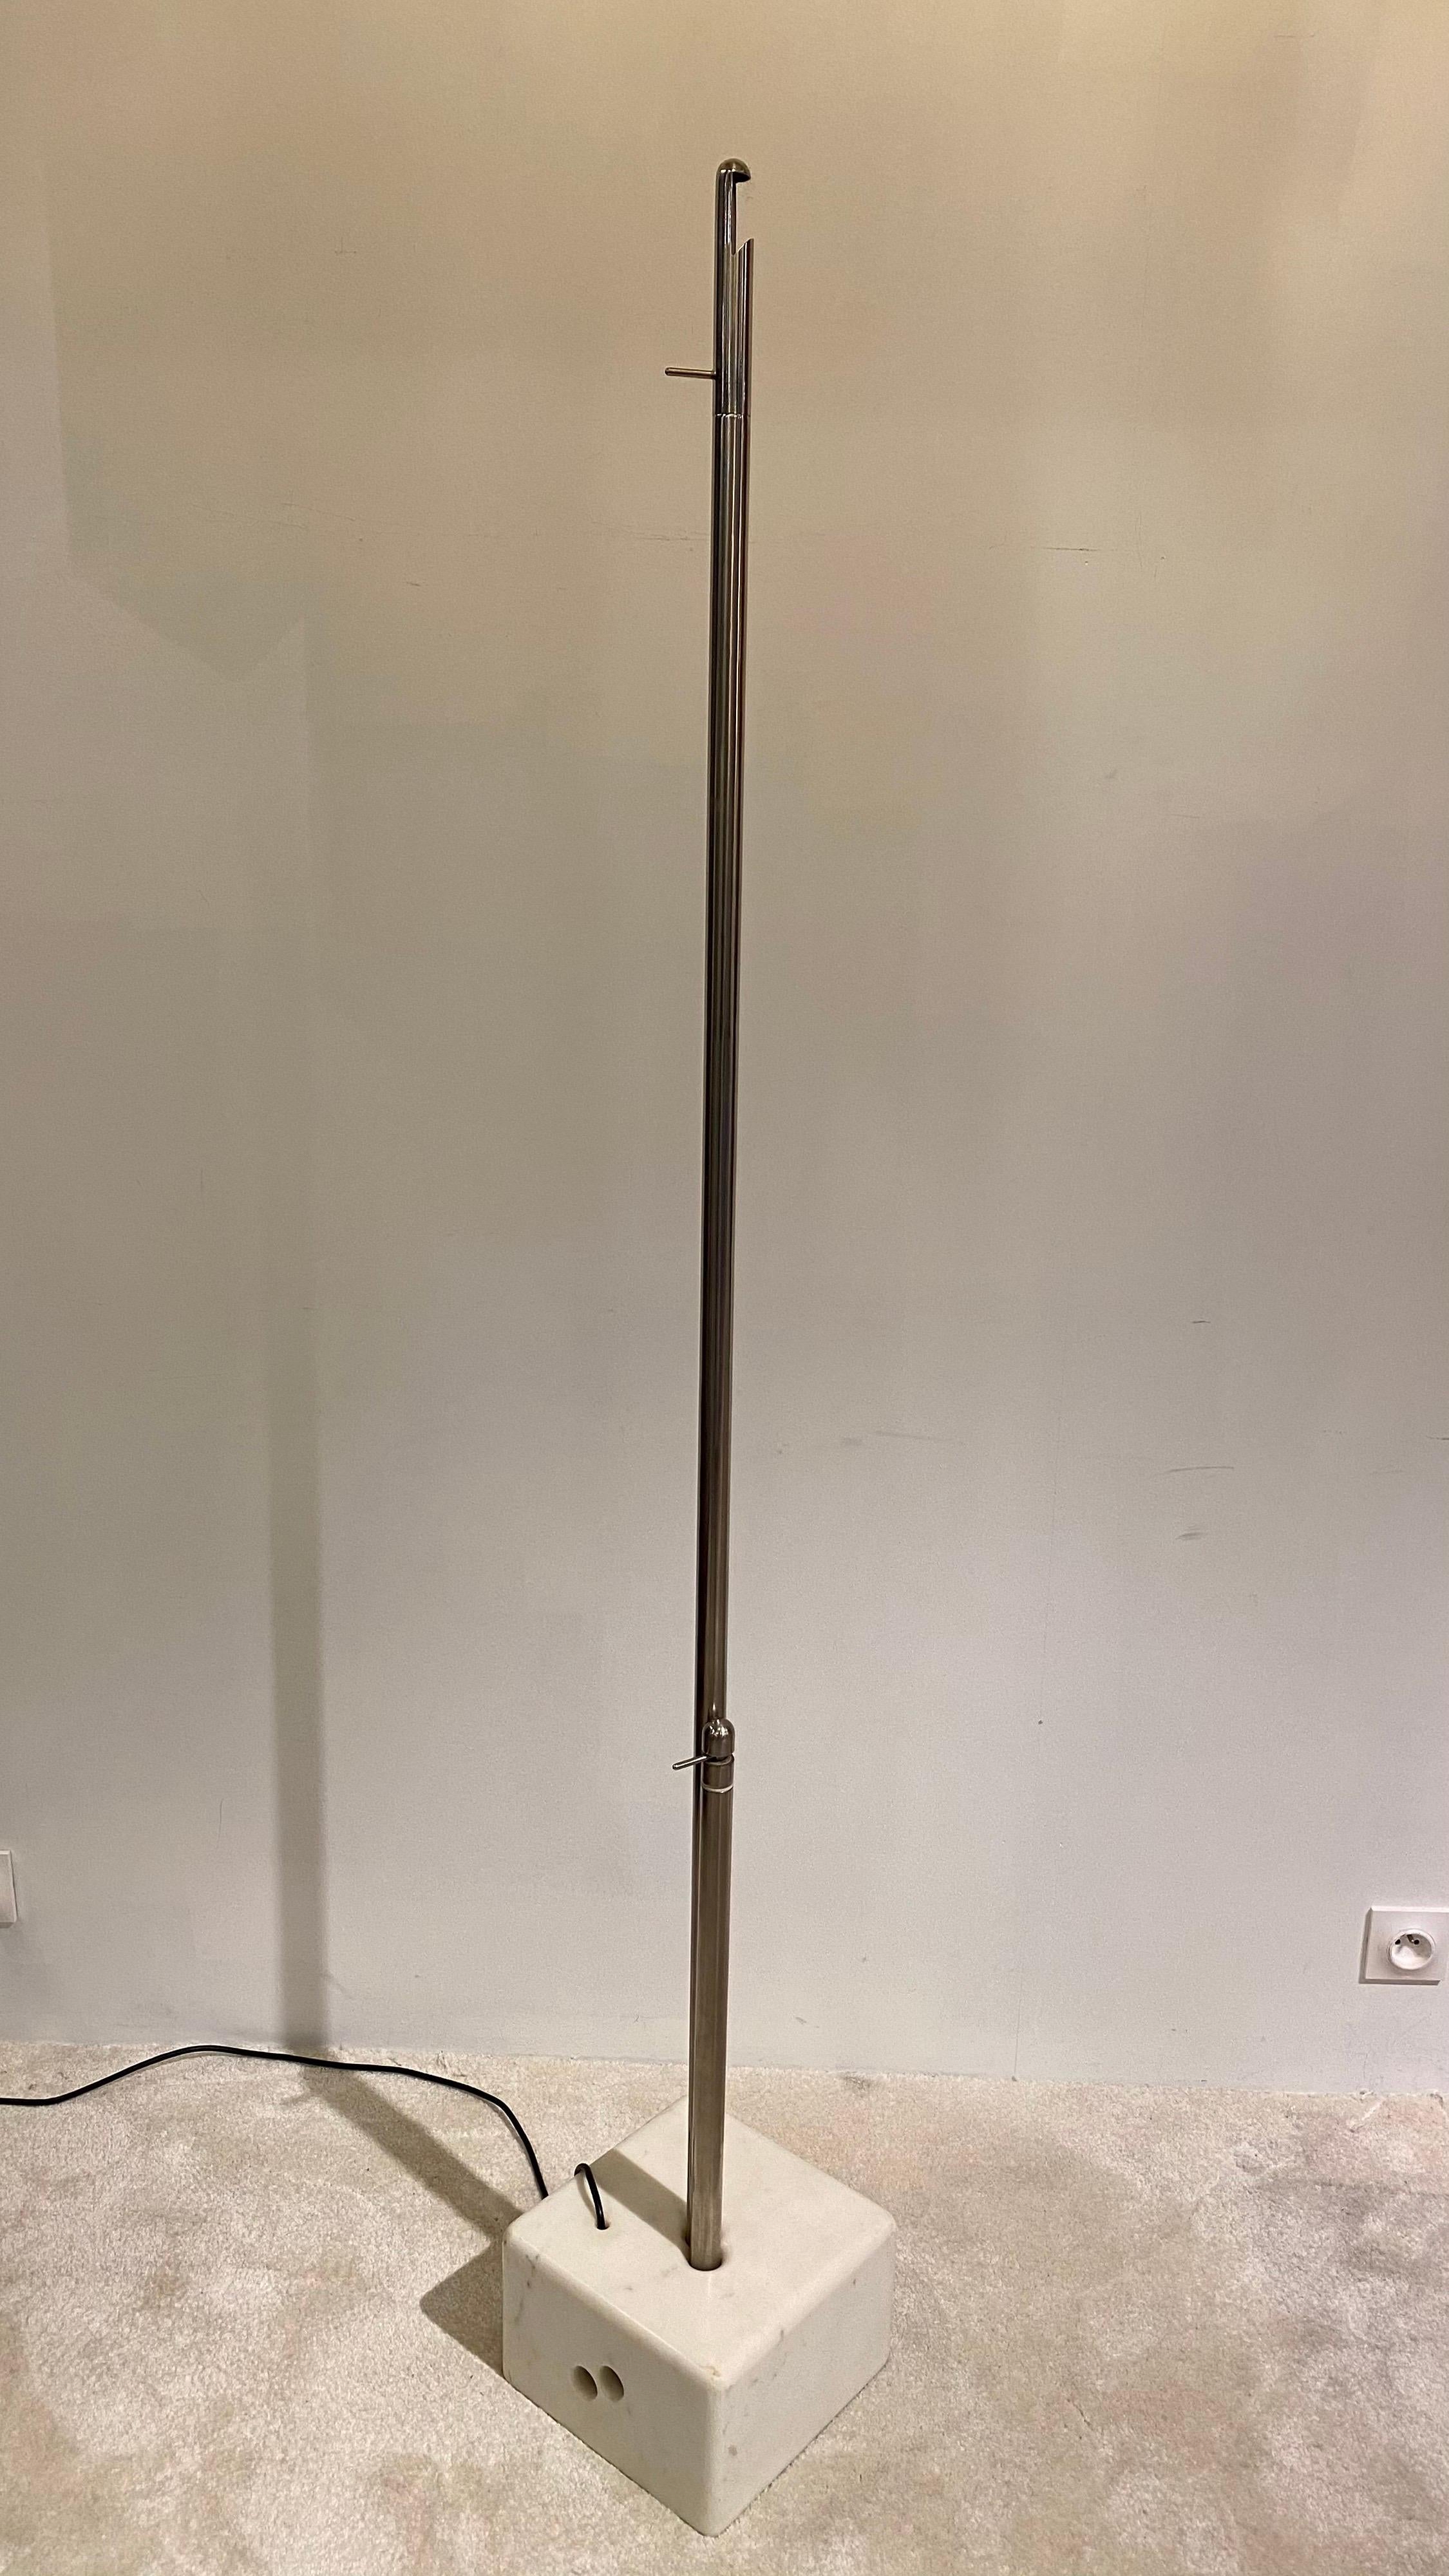 Floor lamp laser designed by Giorgio De Ferrari for VeArt , 1973.
Floor lamp, in steel with marble base. The dimmer is incorporated in the smaller steel tube and the top of the longer tube is ajustable in all directions.
  